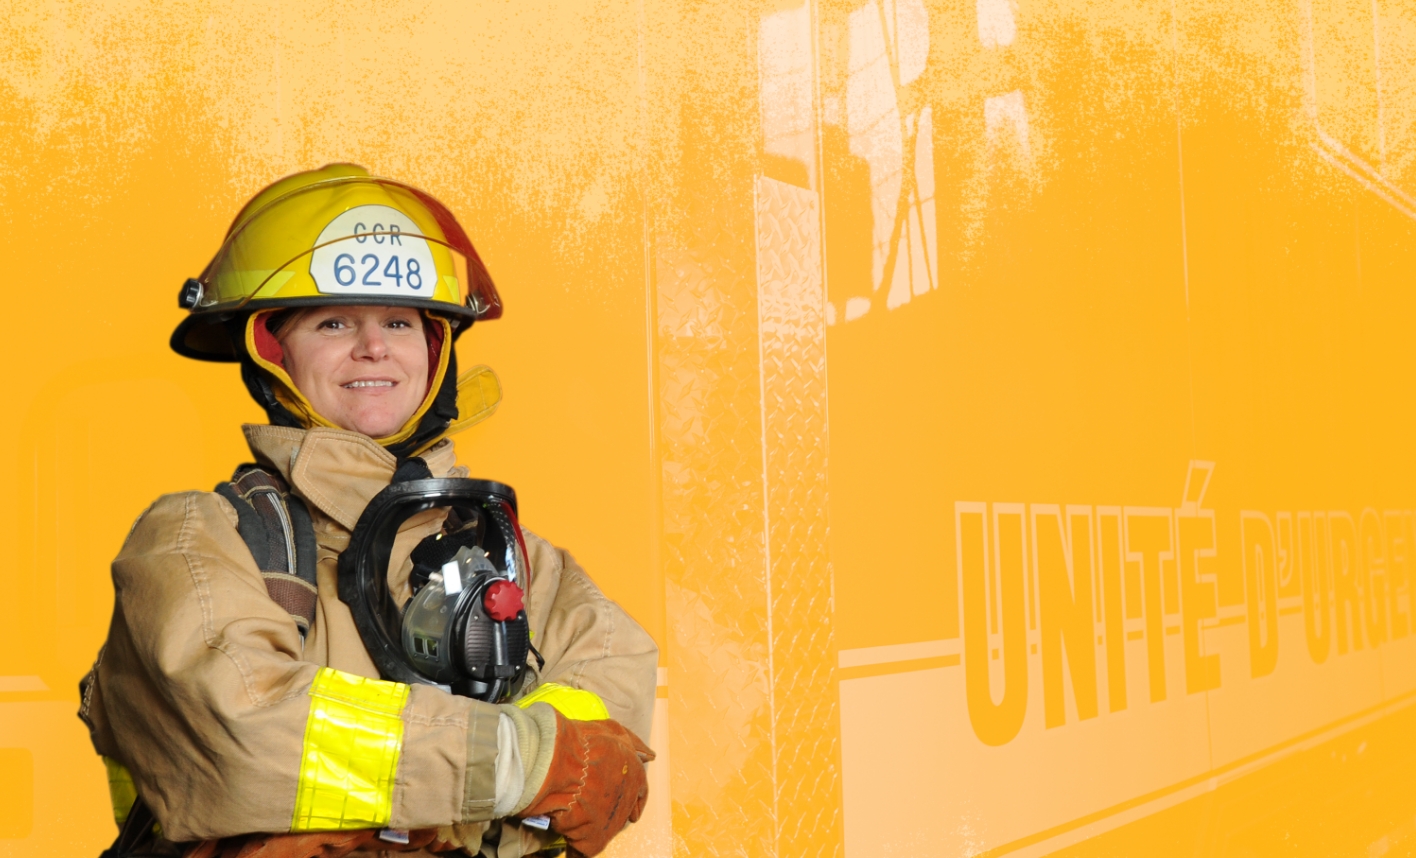 Smiling firefighter wearing helmet and safety gear. Their arms are crossed.